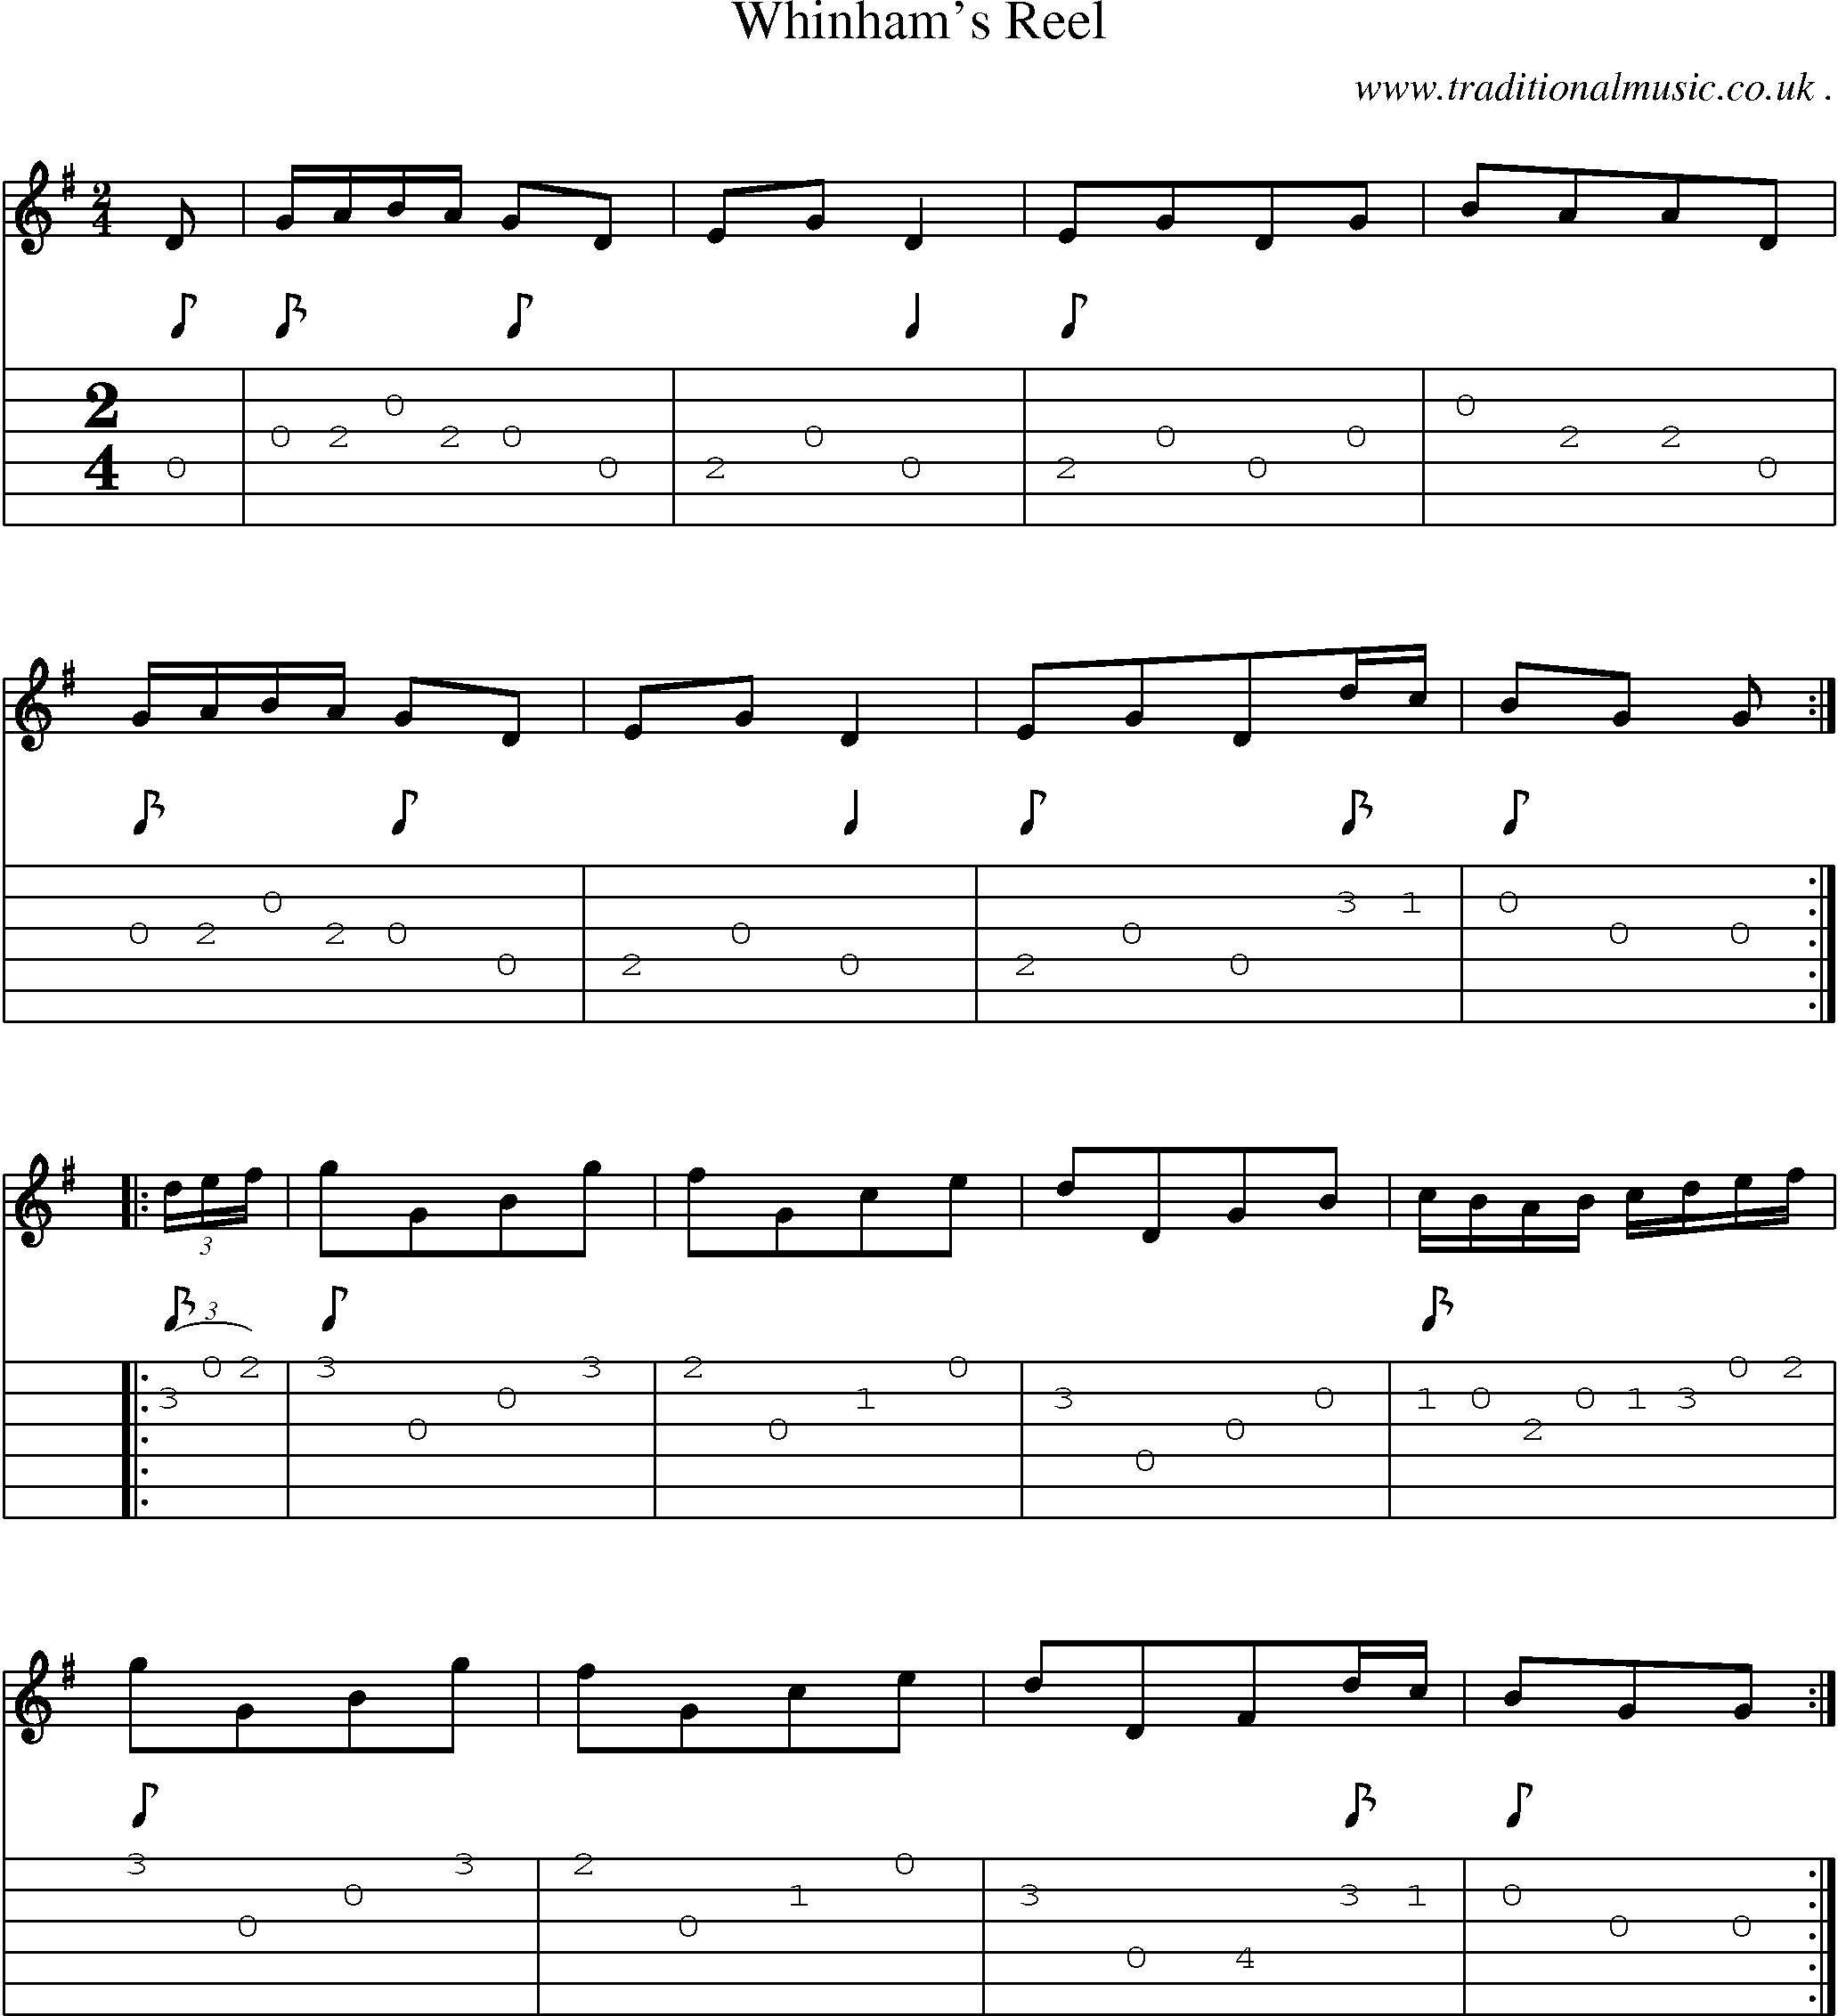 Sheet-Music and Guitar Tabs for Whinhams Reel